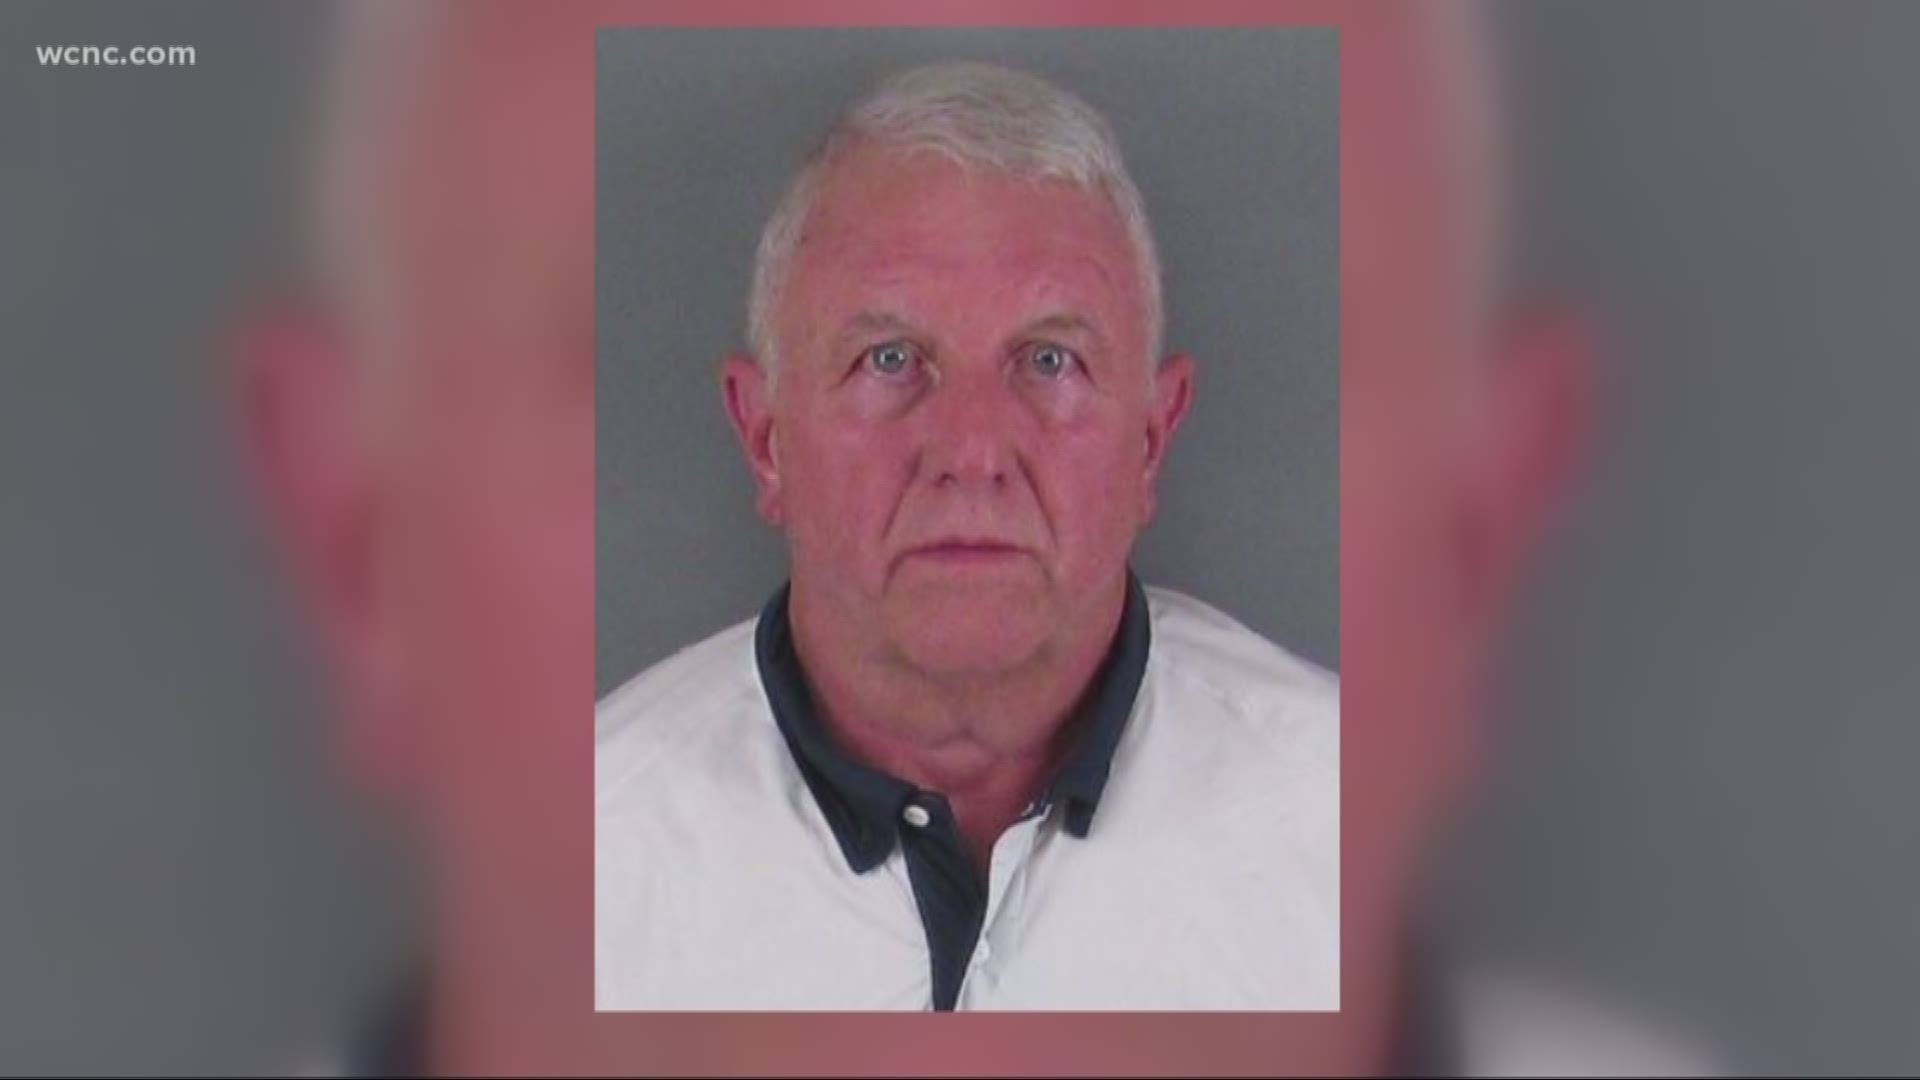 The pastor of the man accused of crashing into a Gaston County restaurant says he suffers from severe depression, which led to the deadly incident. 